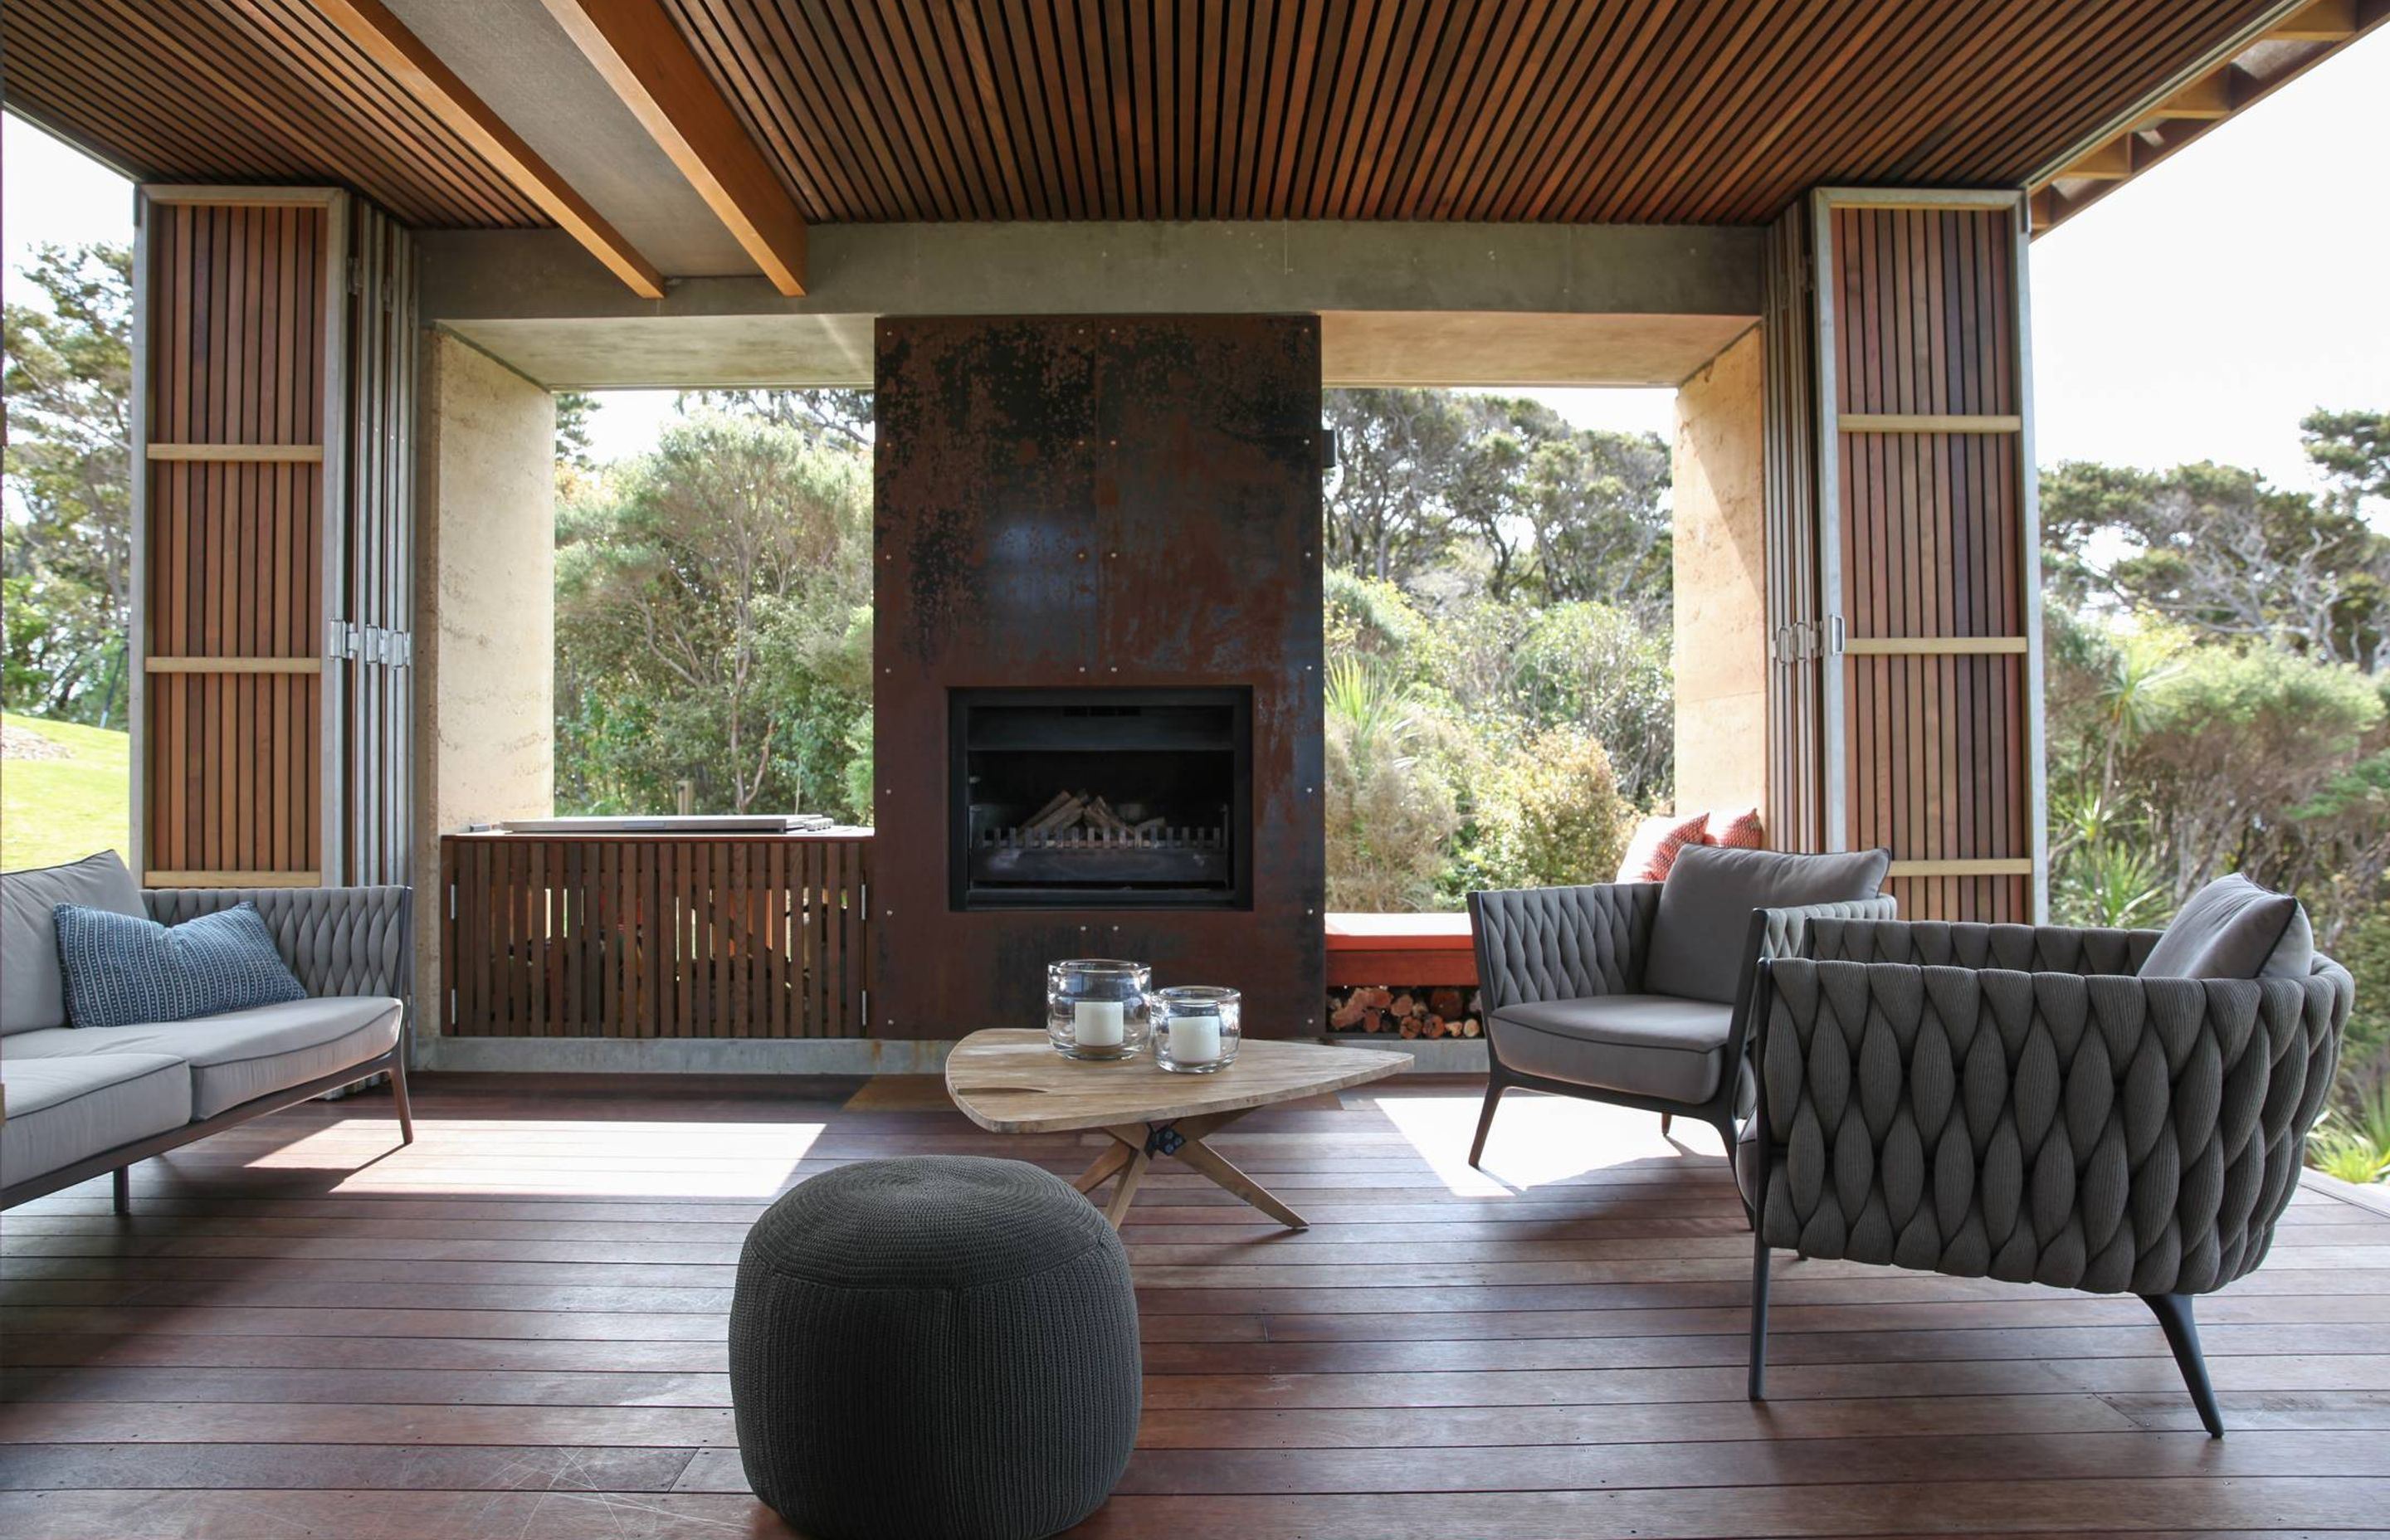 The outdoor room features cedar rainscreens, wide-plank spotted gum flooring and an open wood fire with metal surroundls. Photograph by Jackie Meiring.